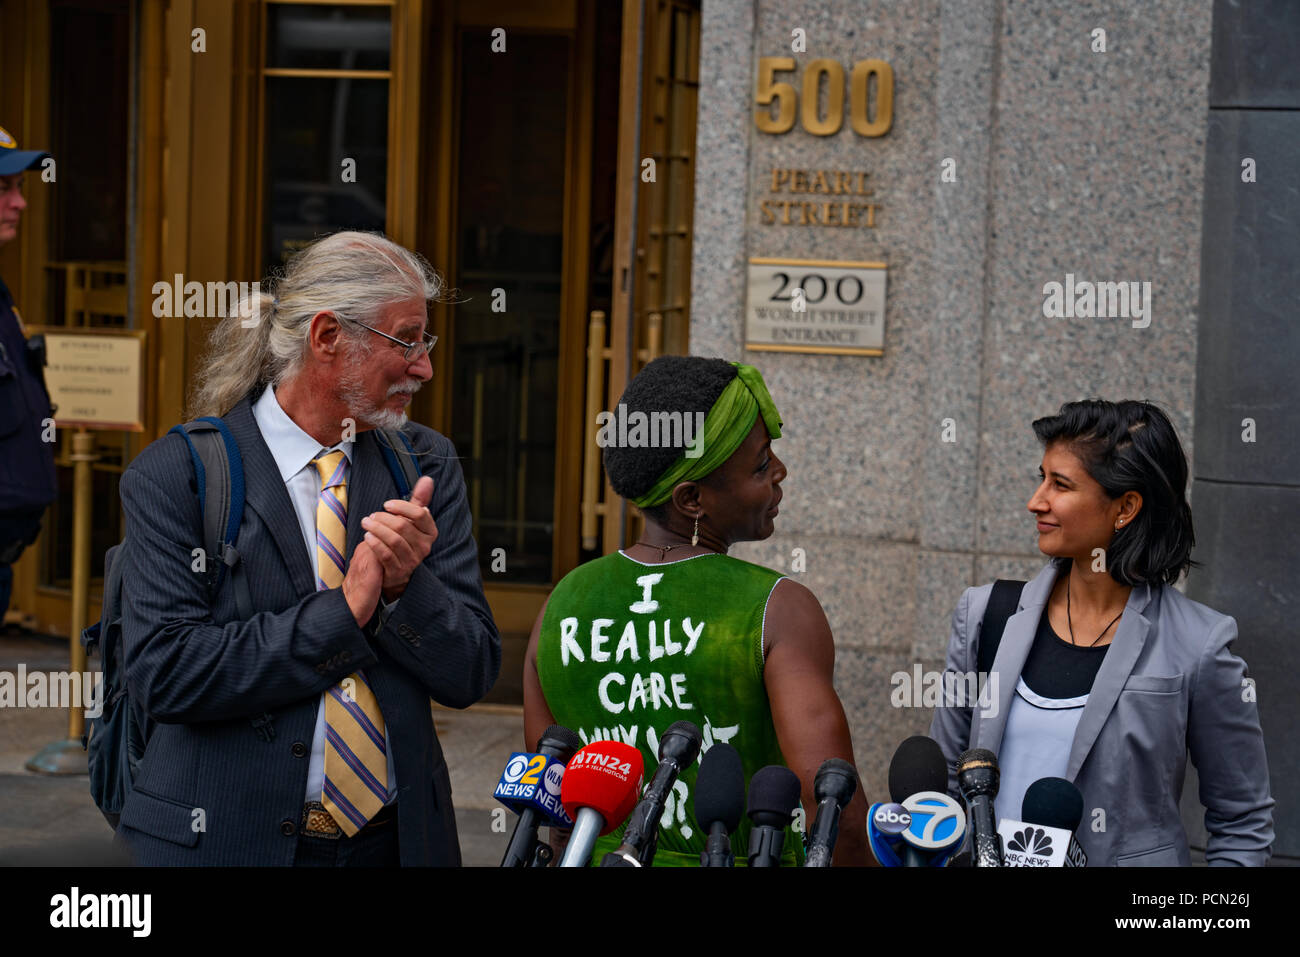 New York, New York, U.S., 3 August 2018 Immigration activist Therese Patricia Okoumou, with lawyers at her side, speaks outside federal court in Manhattan after hearing on trespassing & disorderly conduct charges.  Okoumou, a Congo native, scaled base of Statue of Liberty on July 4, 2018, to protest against Trump administration immigration policies.  Okoumou wore a green dress to court bearing the words “I really care why won’t u?” – a response to first lady Melania Trump, who wore a jacket with the words “I really don’t care, do u?” when she visited a facility for migrant children in June. Stock Photo